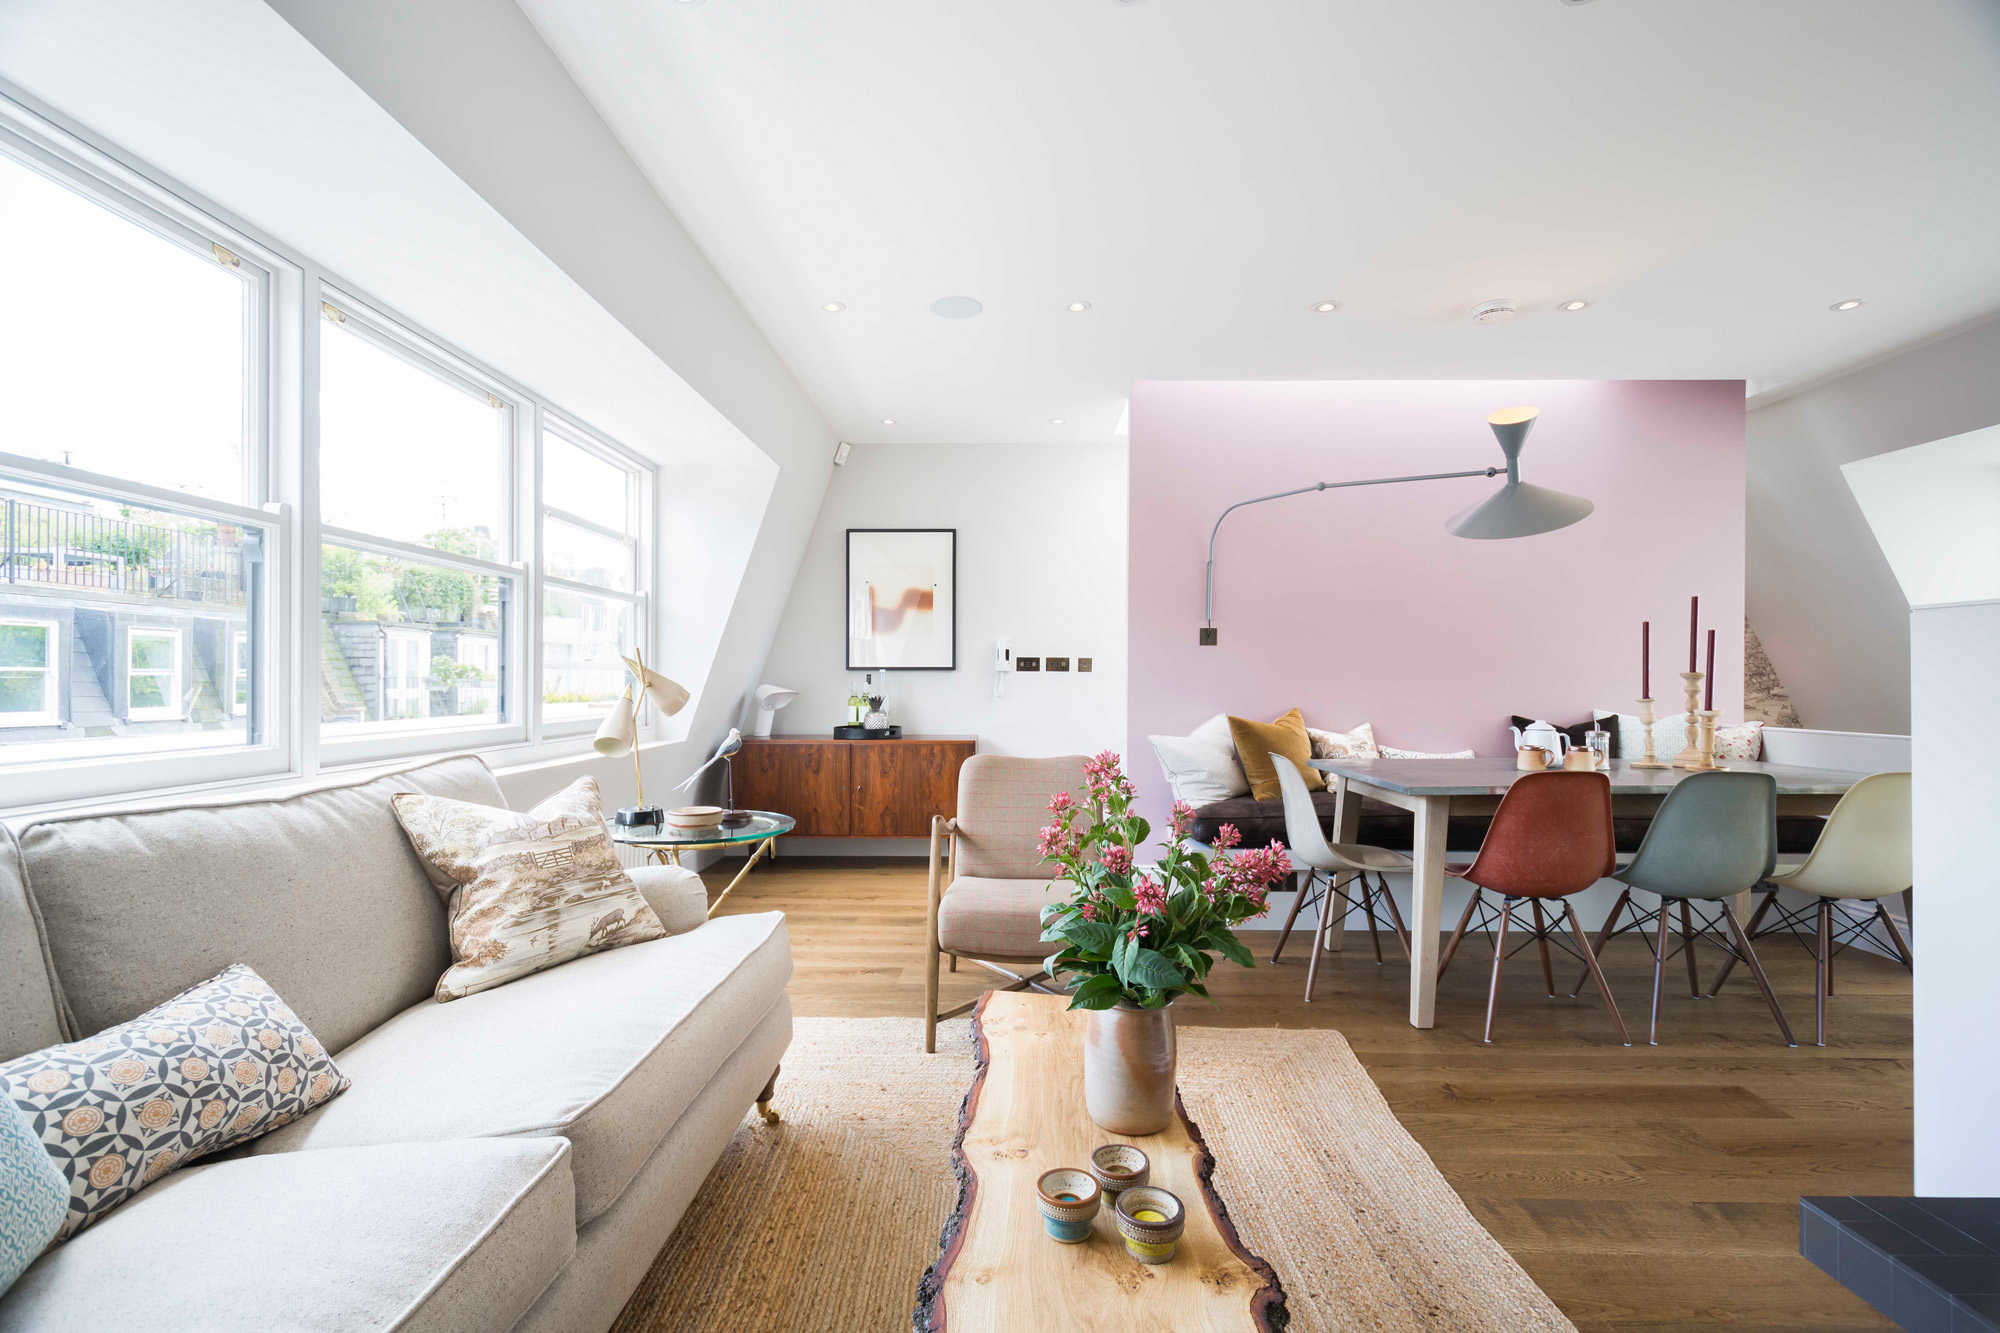 For Sale: St Luke's Mews Notting Hill W11 contemporary interior design